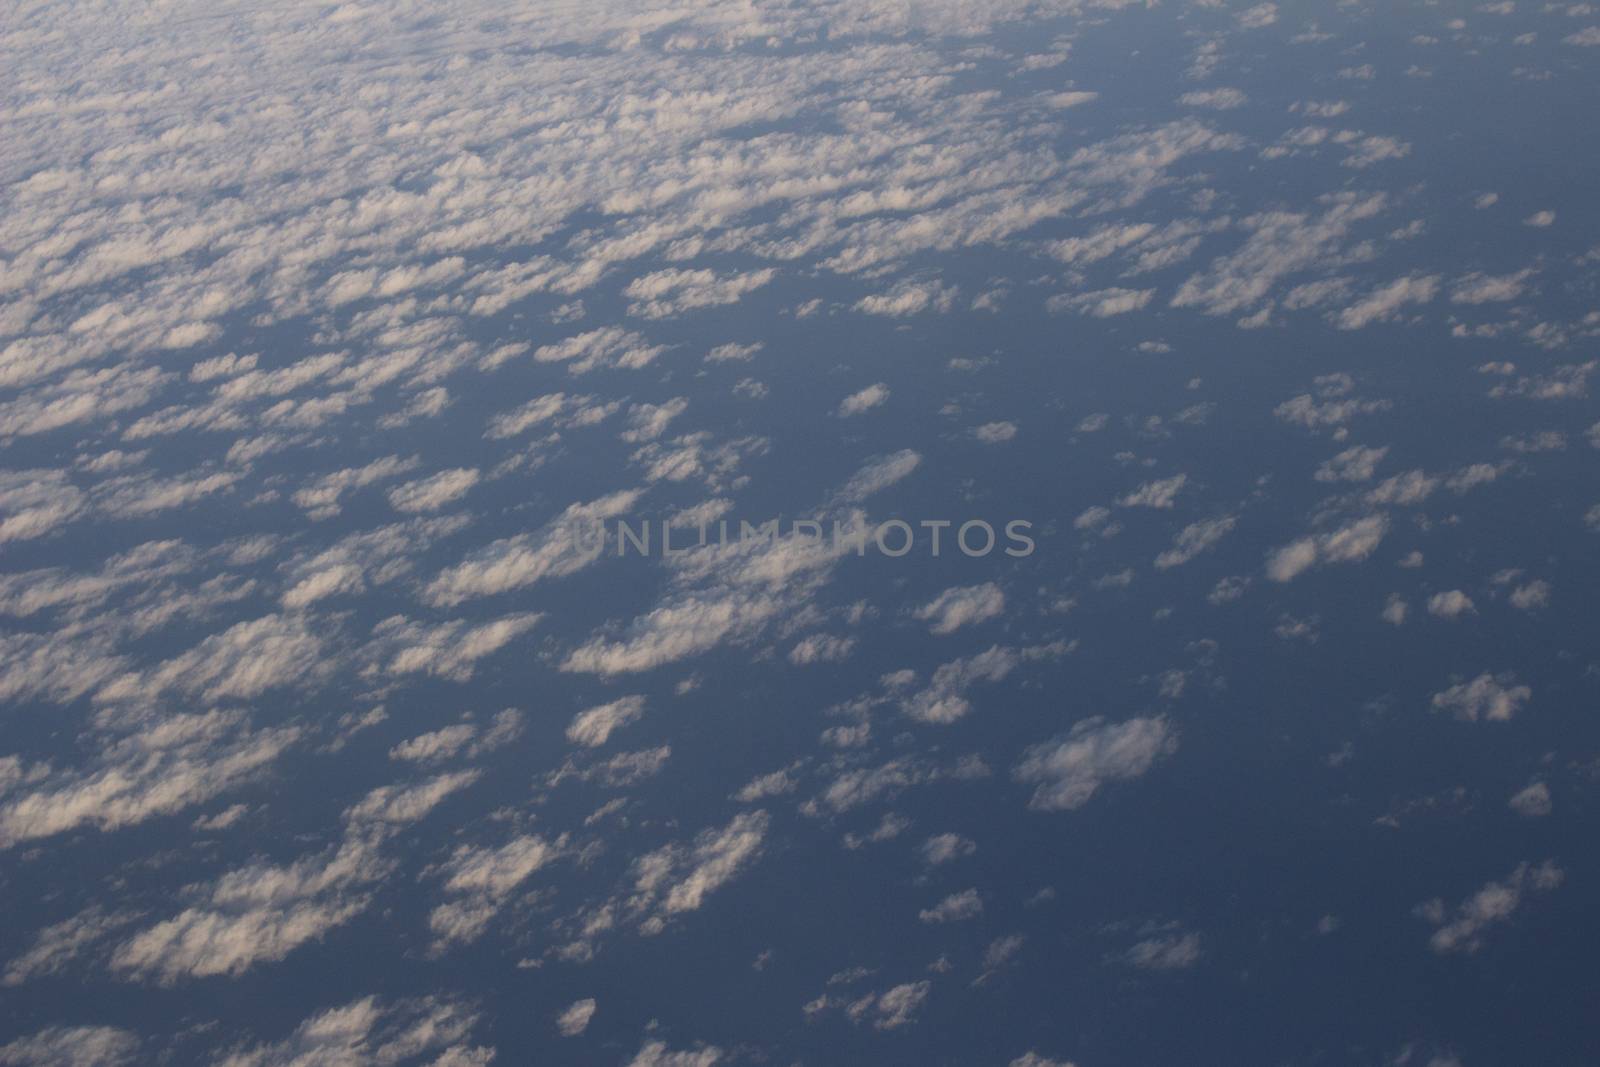 Blue sky with clouds seen from plane window by edwardolive